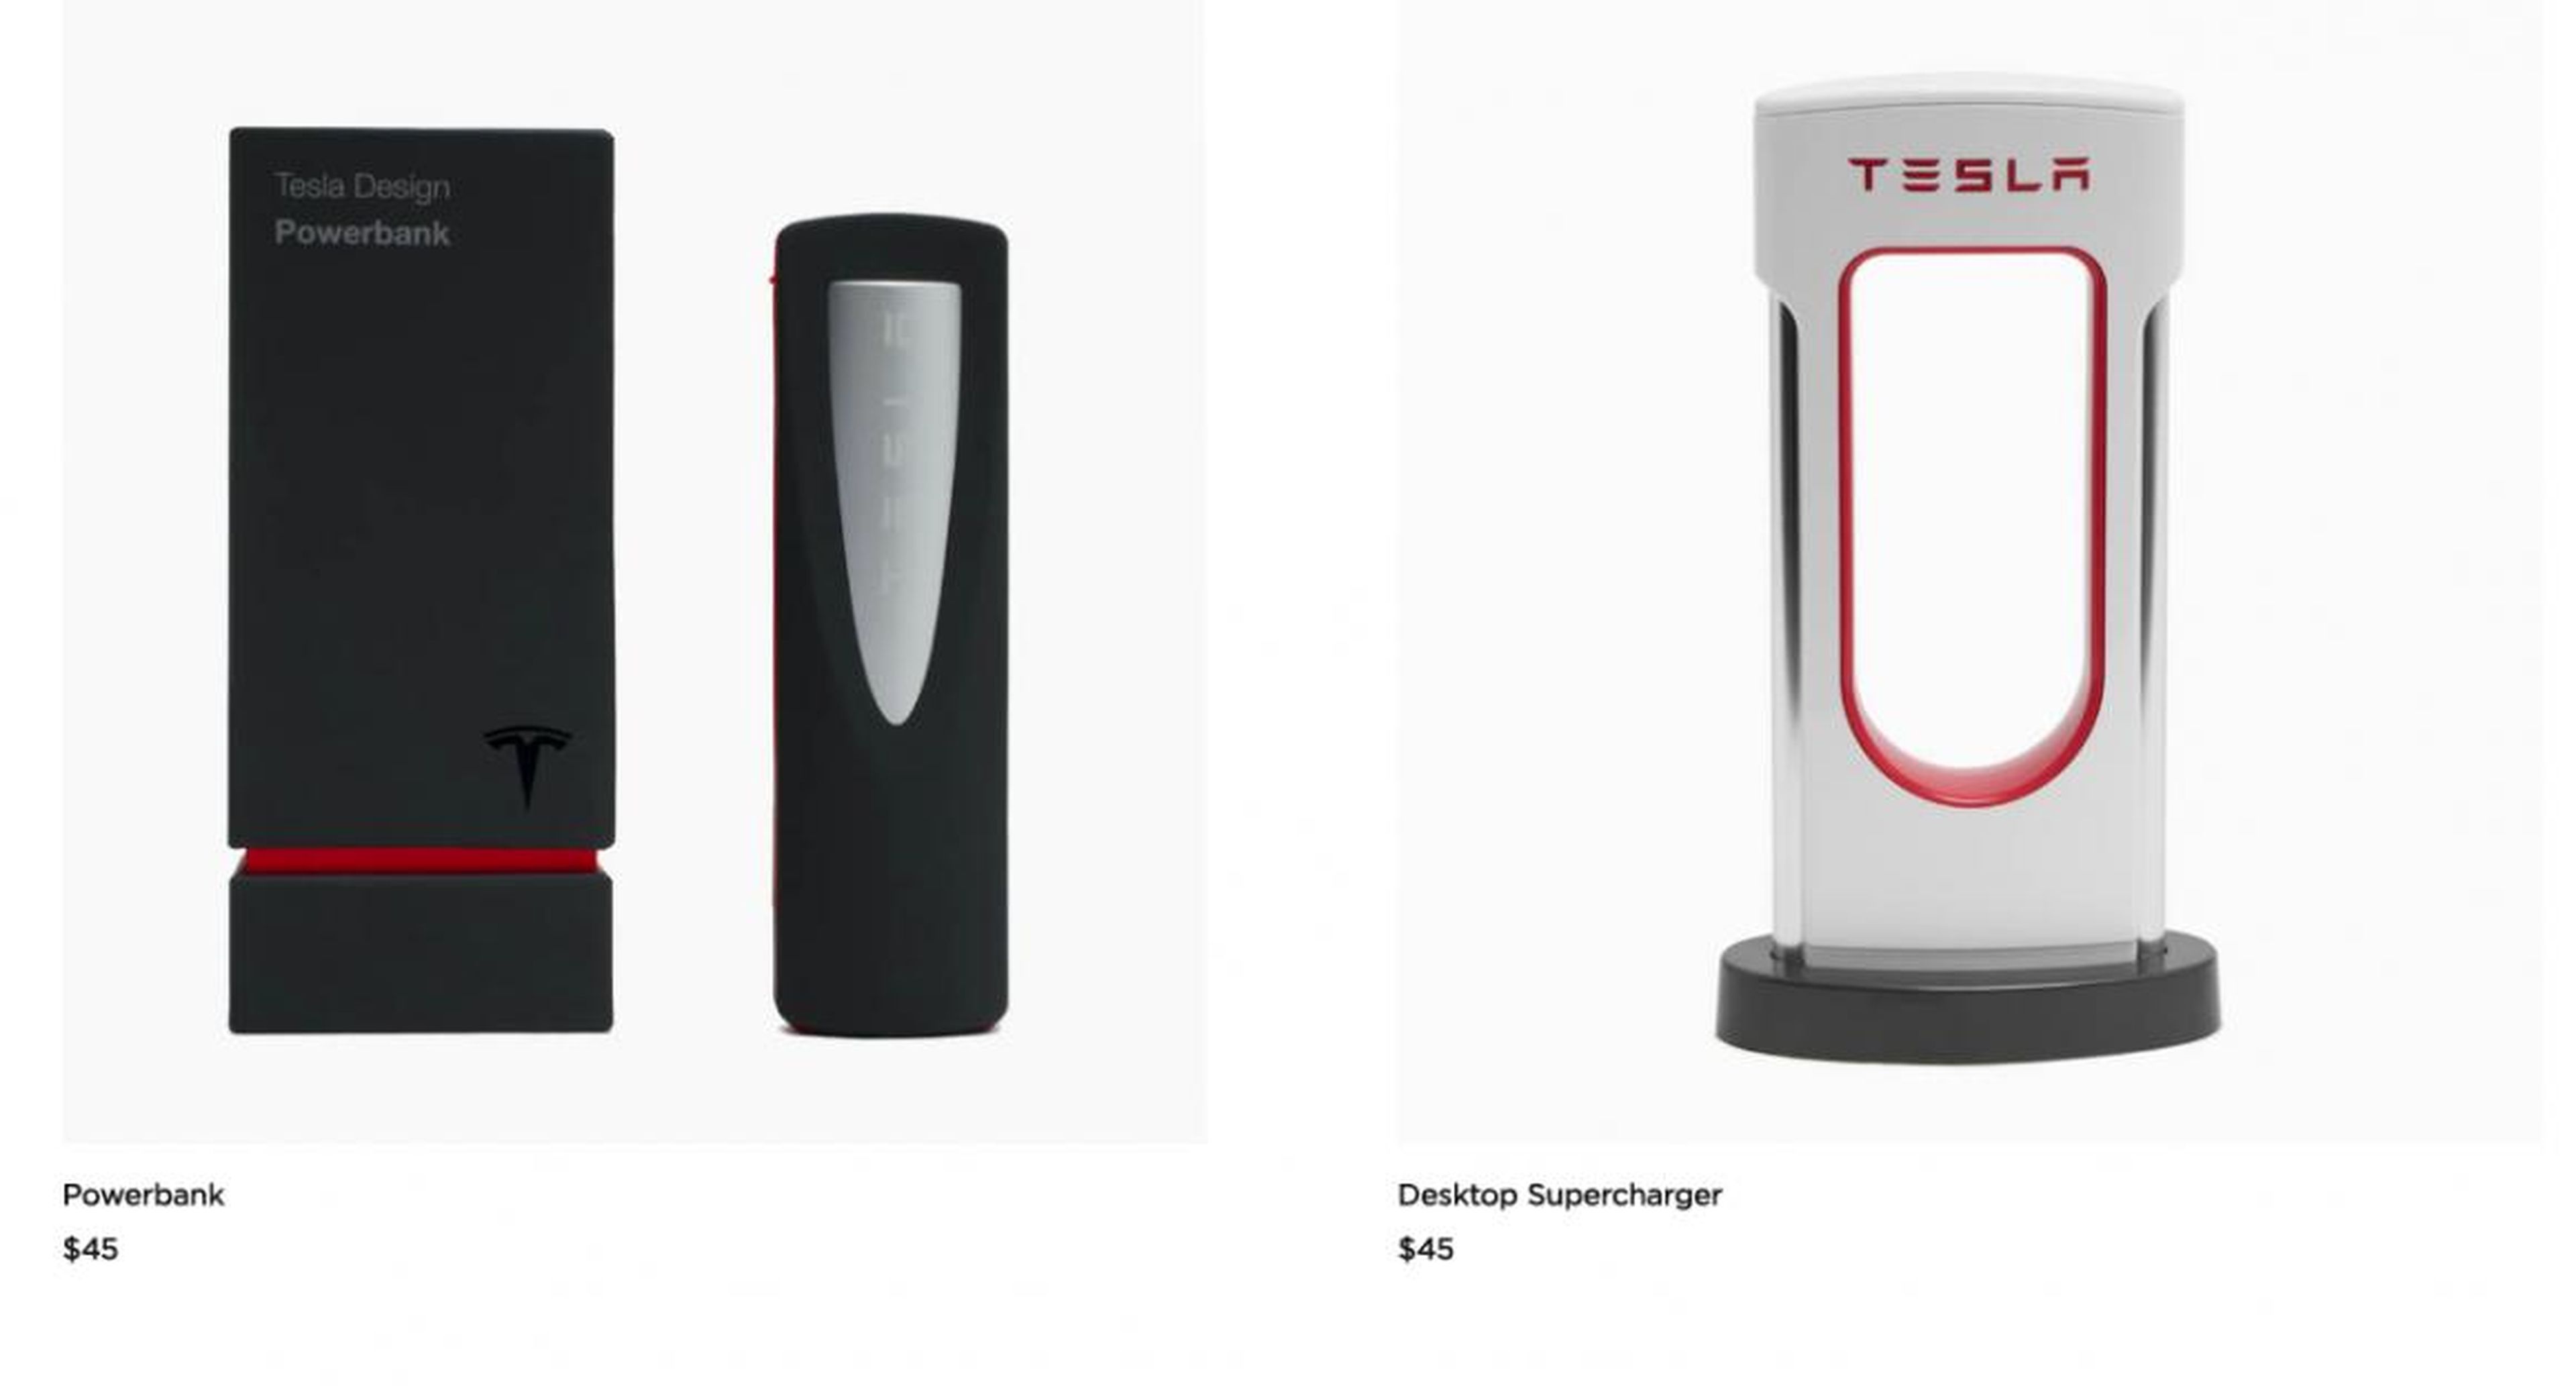 Tesla sells some other phone chargers as well. The Powerbank is a portable charger, and the Desktop Supercharger is modeled after a Tesla car charger.